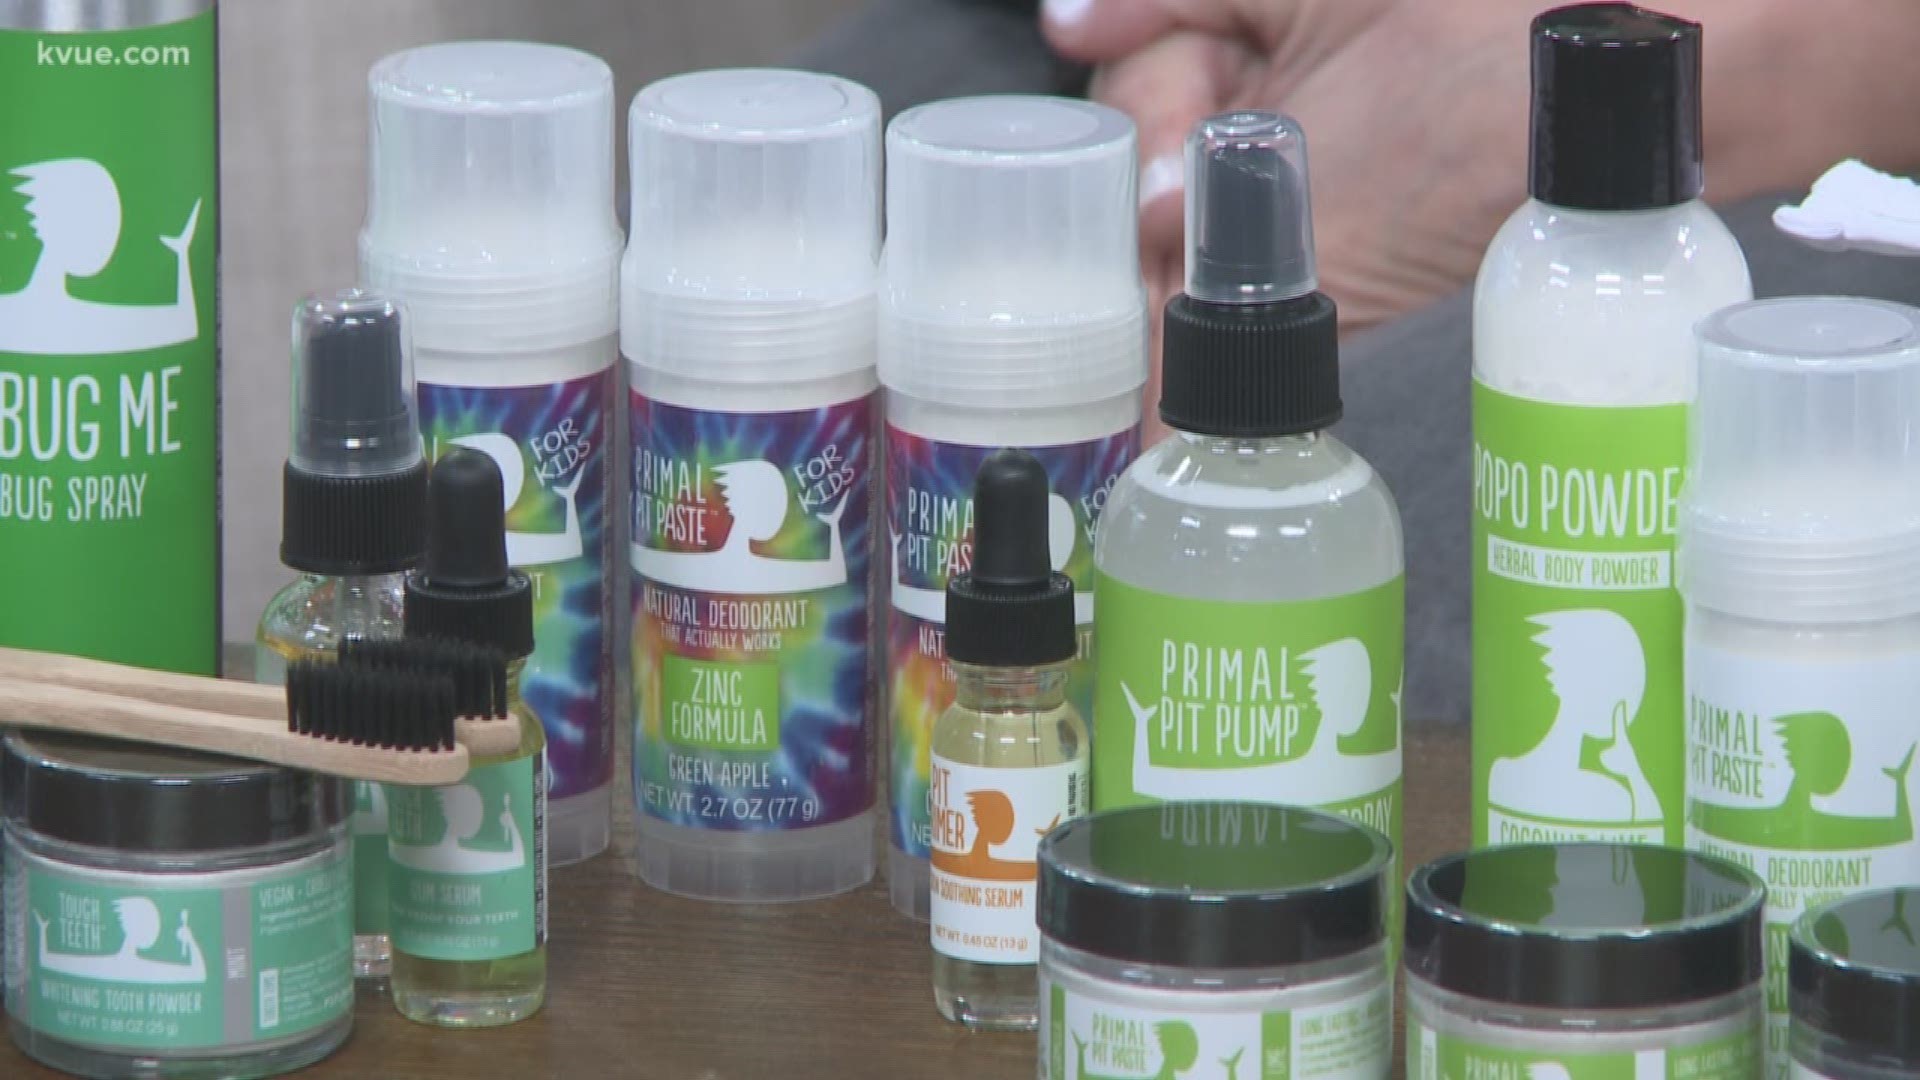 During Made in Austin segments, KVUE features locally-grown companies. Today we have Primal Pit Paste. It’s a natural body care company that makes safe, non-toxic, body care products that are made with 100 percent real, all natural ingredients. CEO and Co-founder Amy Perez joins us today.